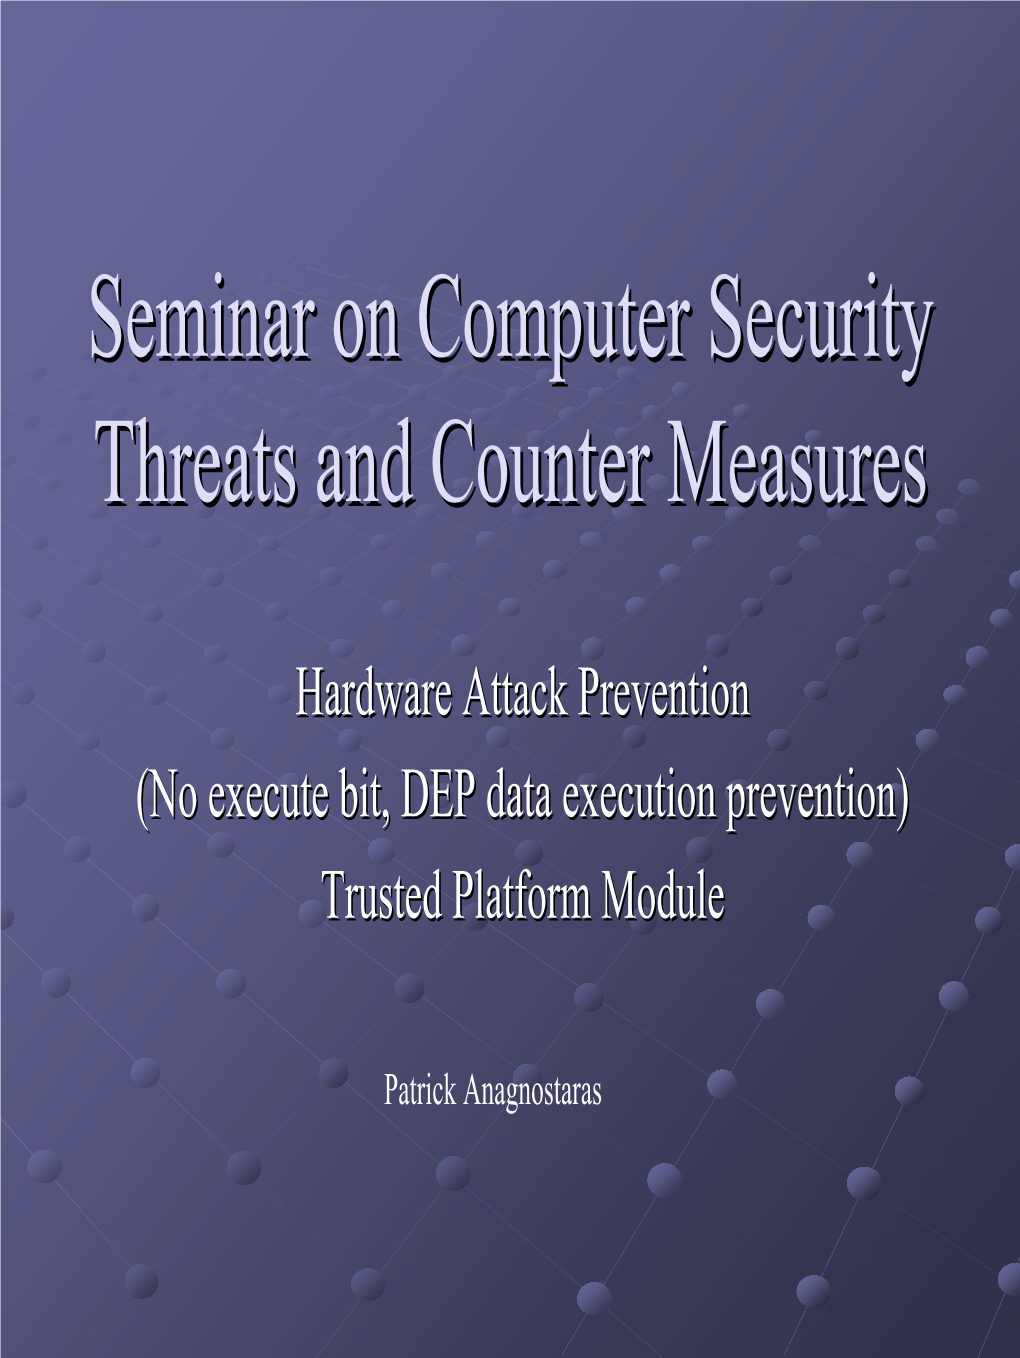 Seminar on Computer Security Threats and Counter Measures